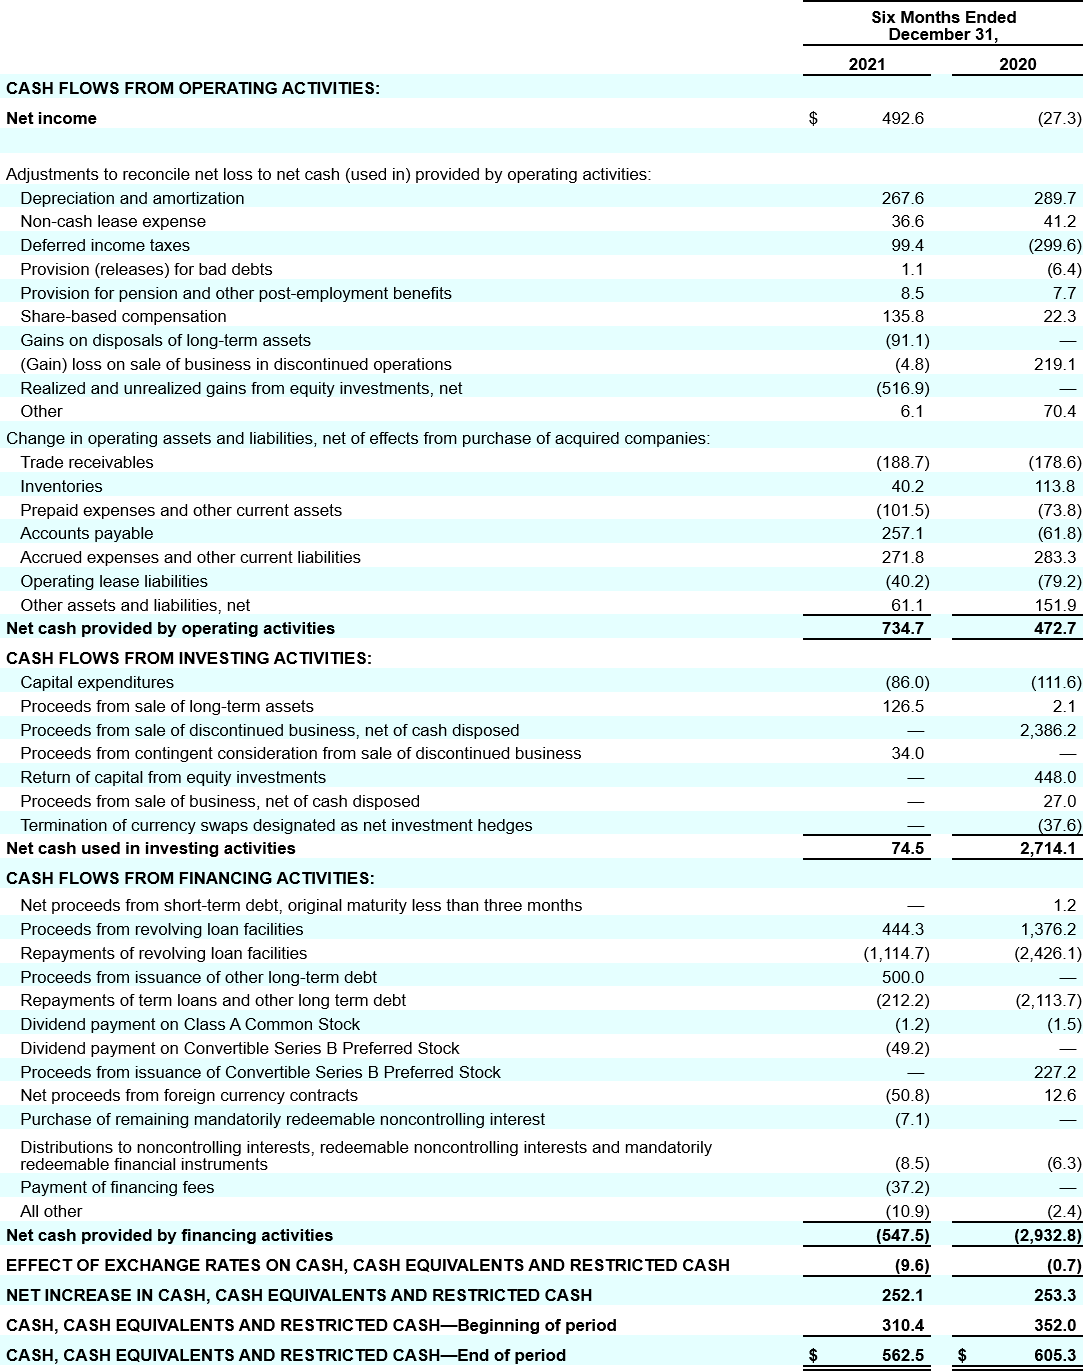 Earnings Release Q2FY22 - Table